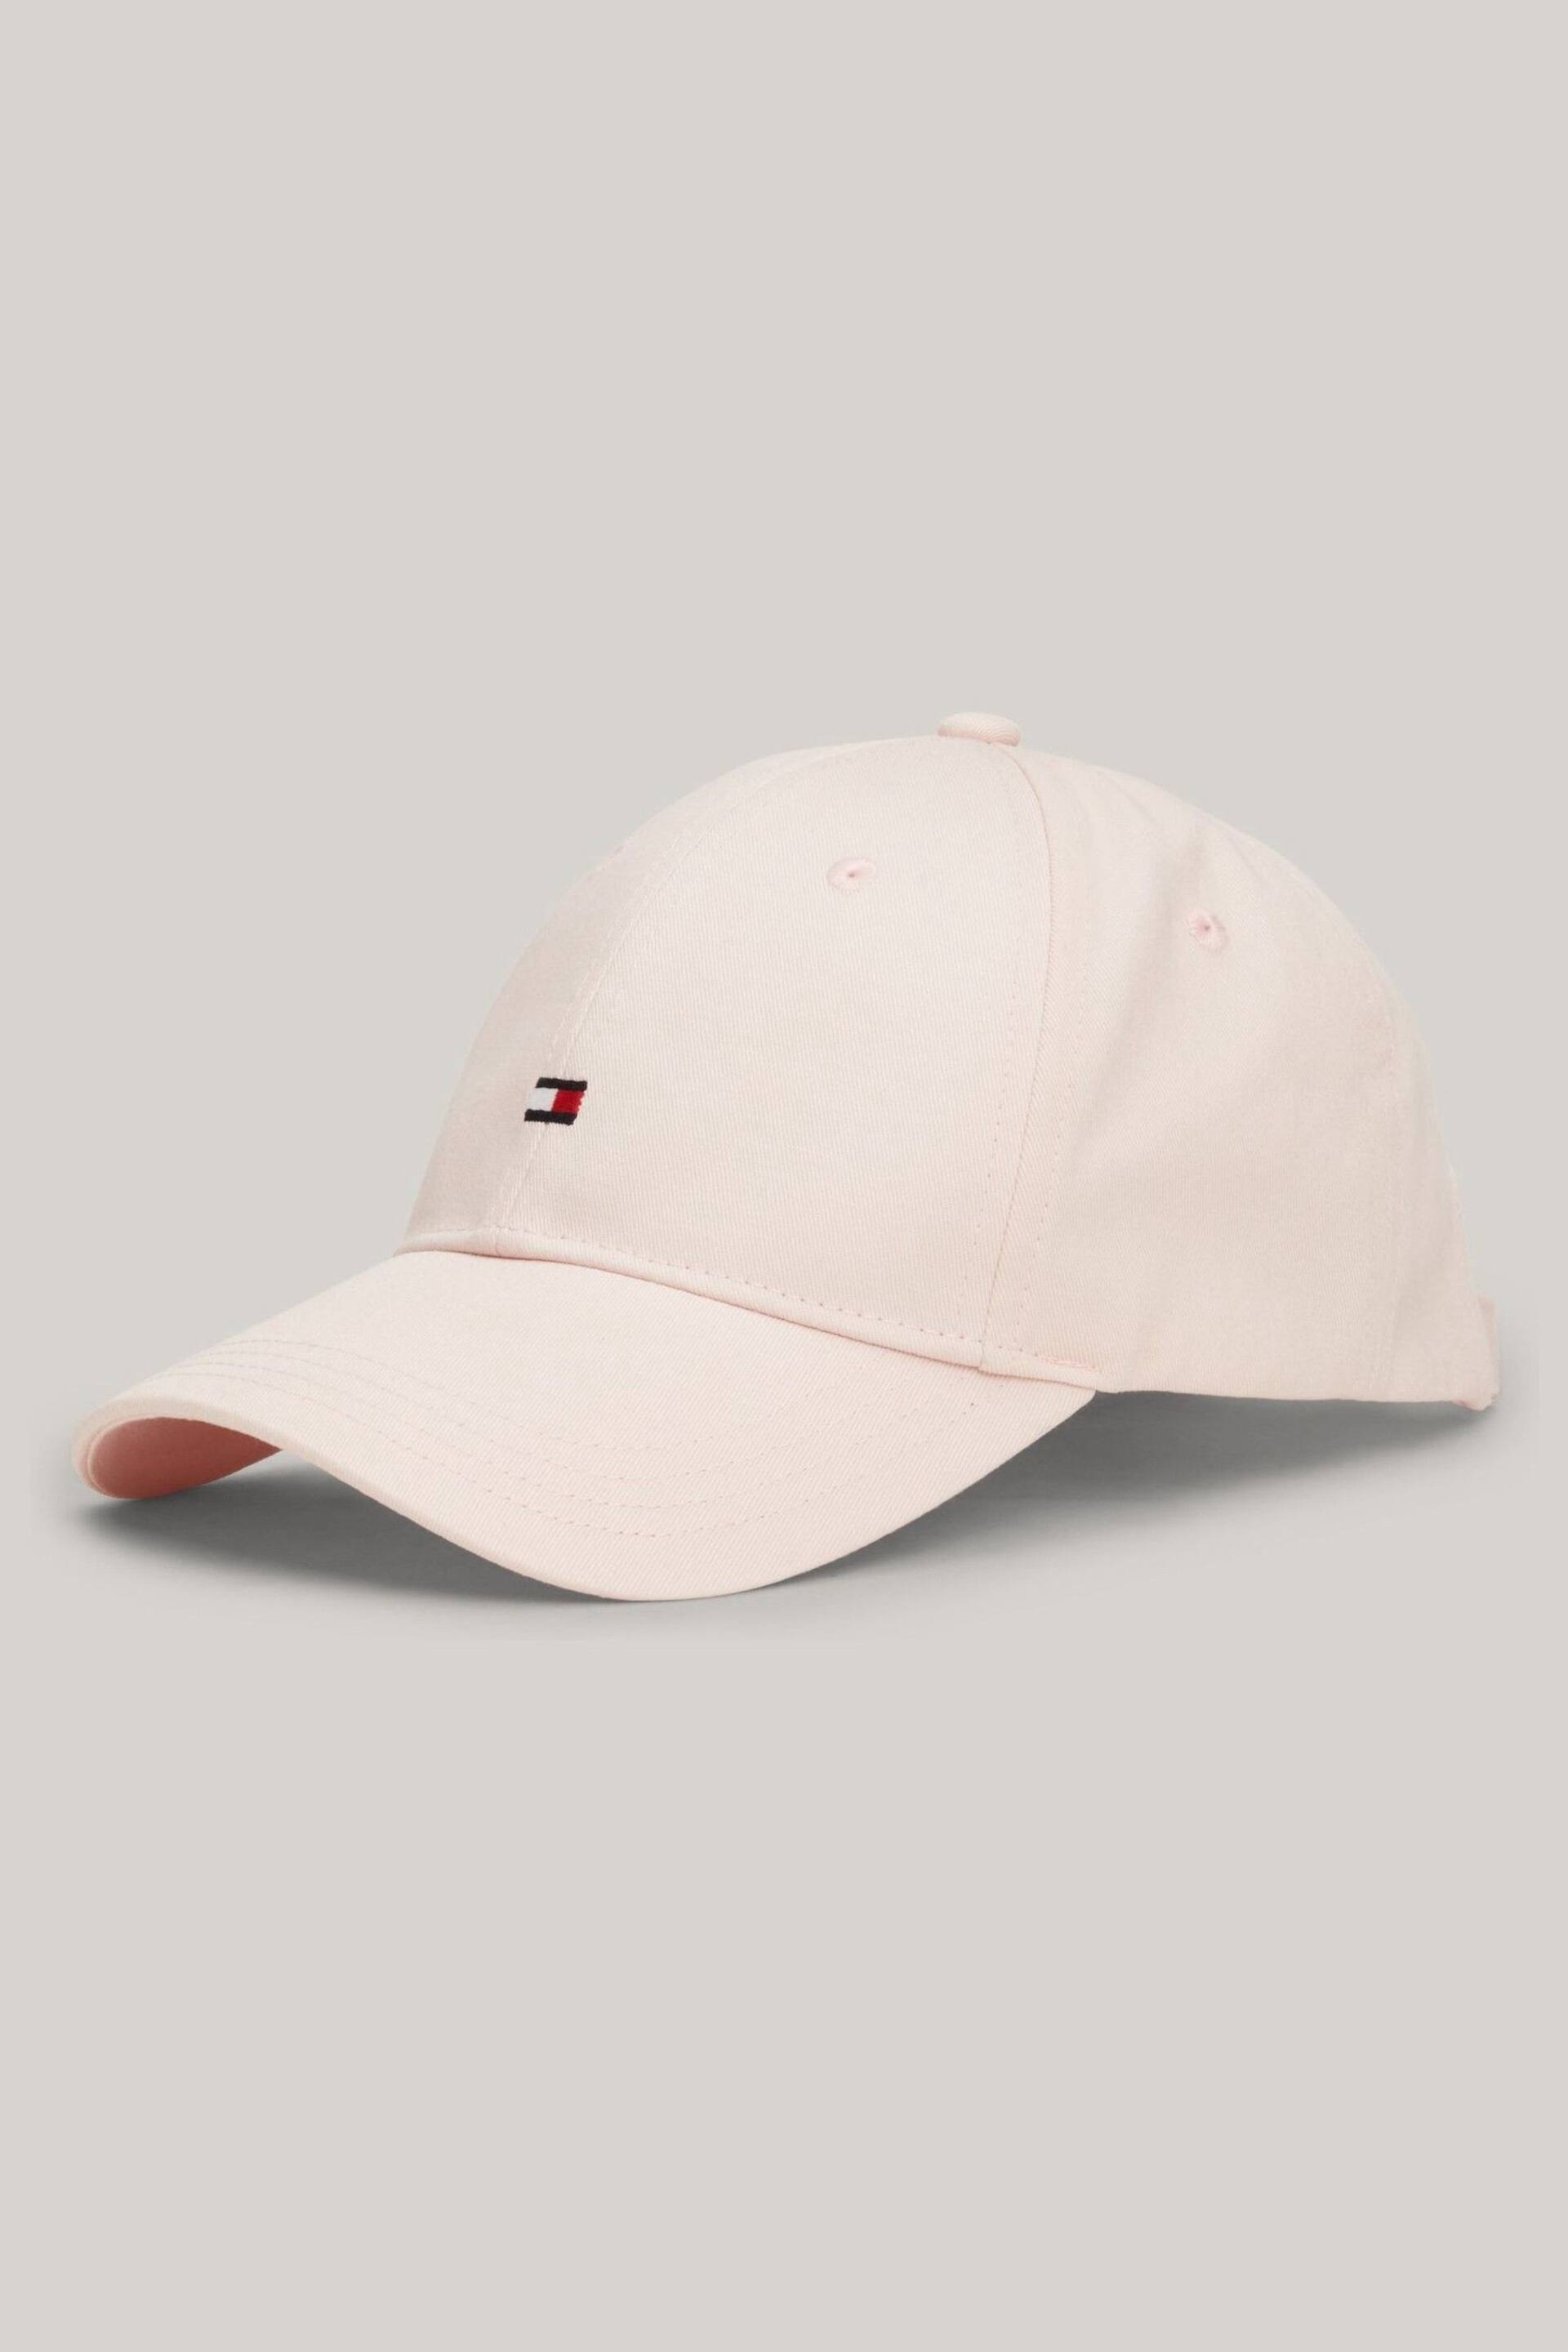 Tommy Hilfiger Pink Small Flag Cap - Image 3 of 4